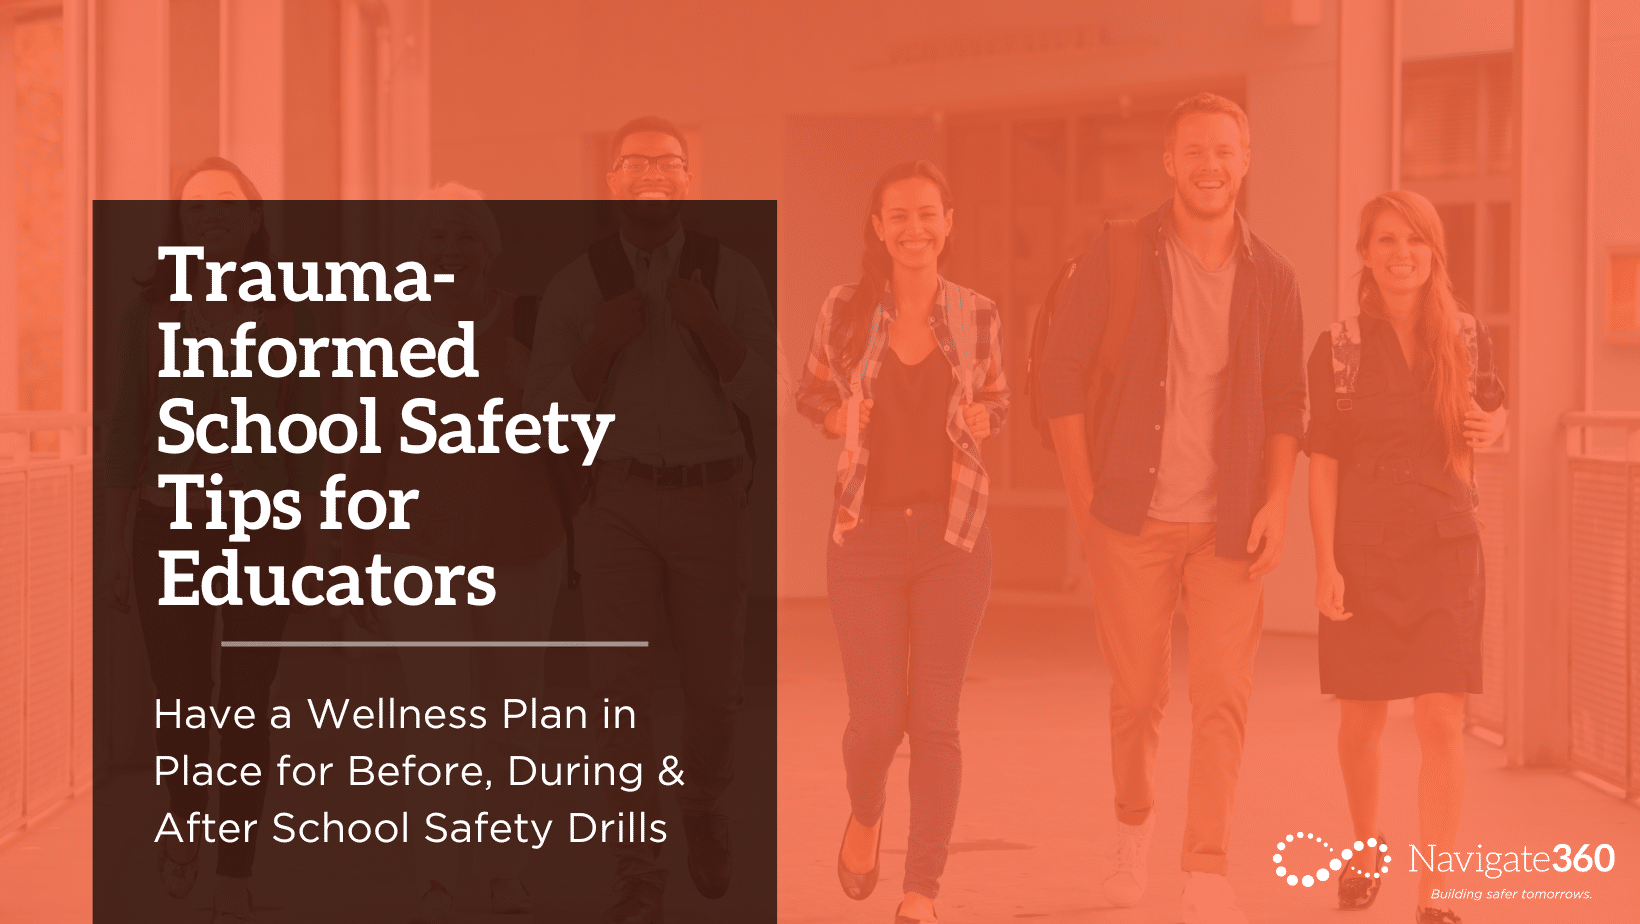 Trauma-Informed School Safety Tips for Educators